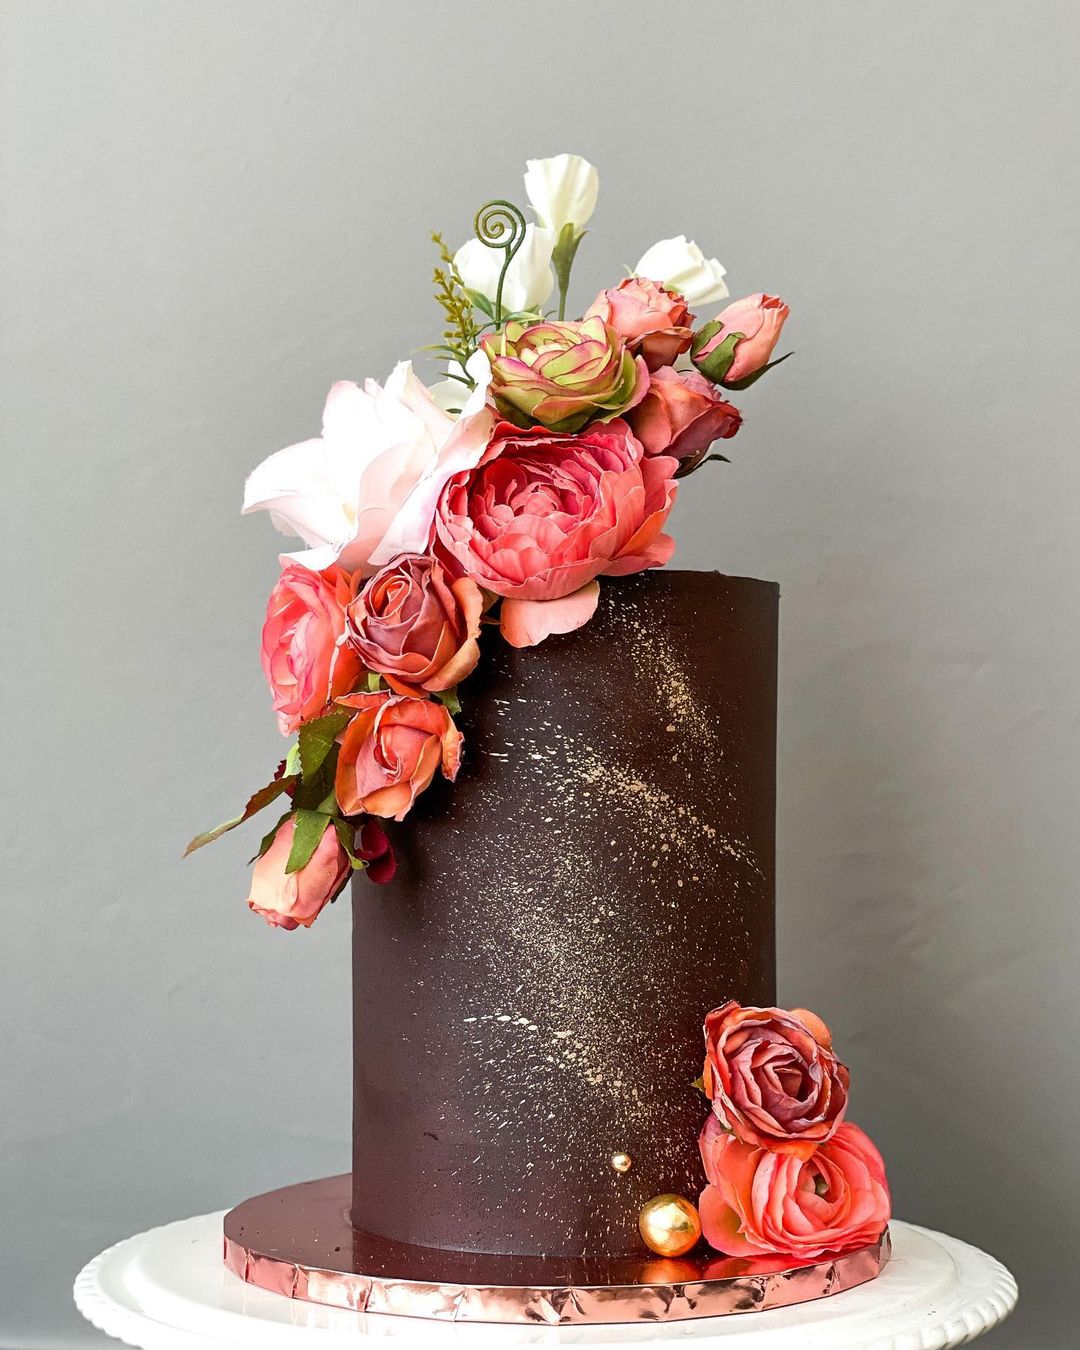 44 cakes of the Prettiest Floral Wedding Cakes | Melody Jacob